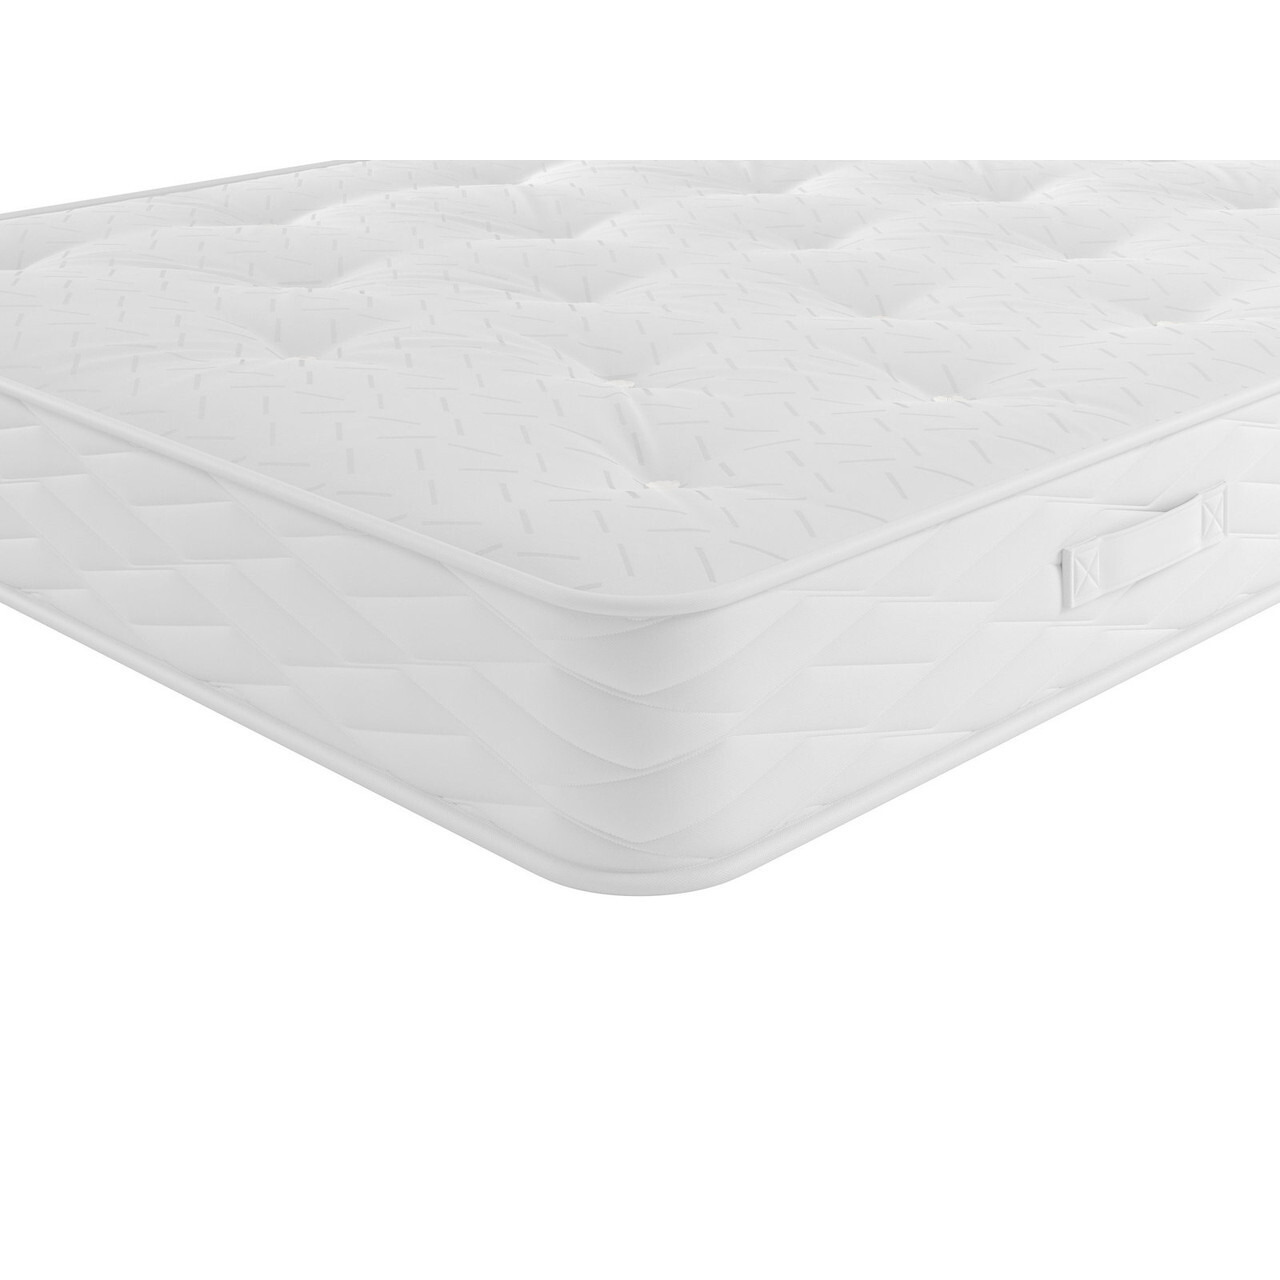 Simply By Bensons Smile Mattress - image 1